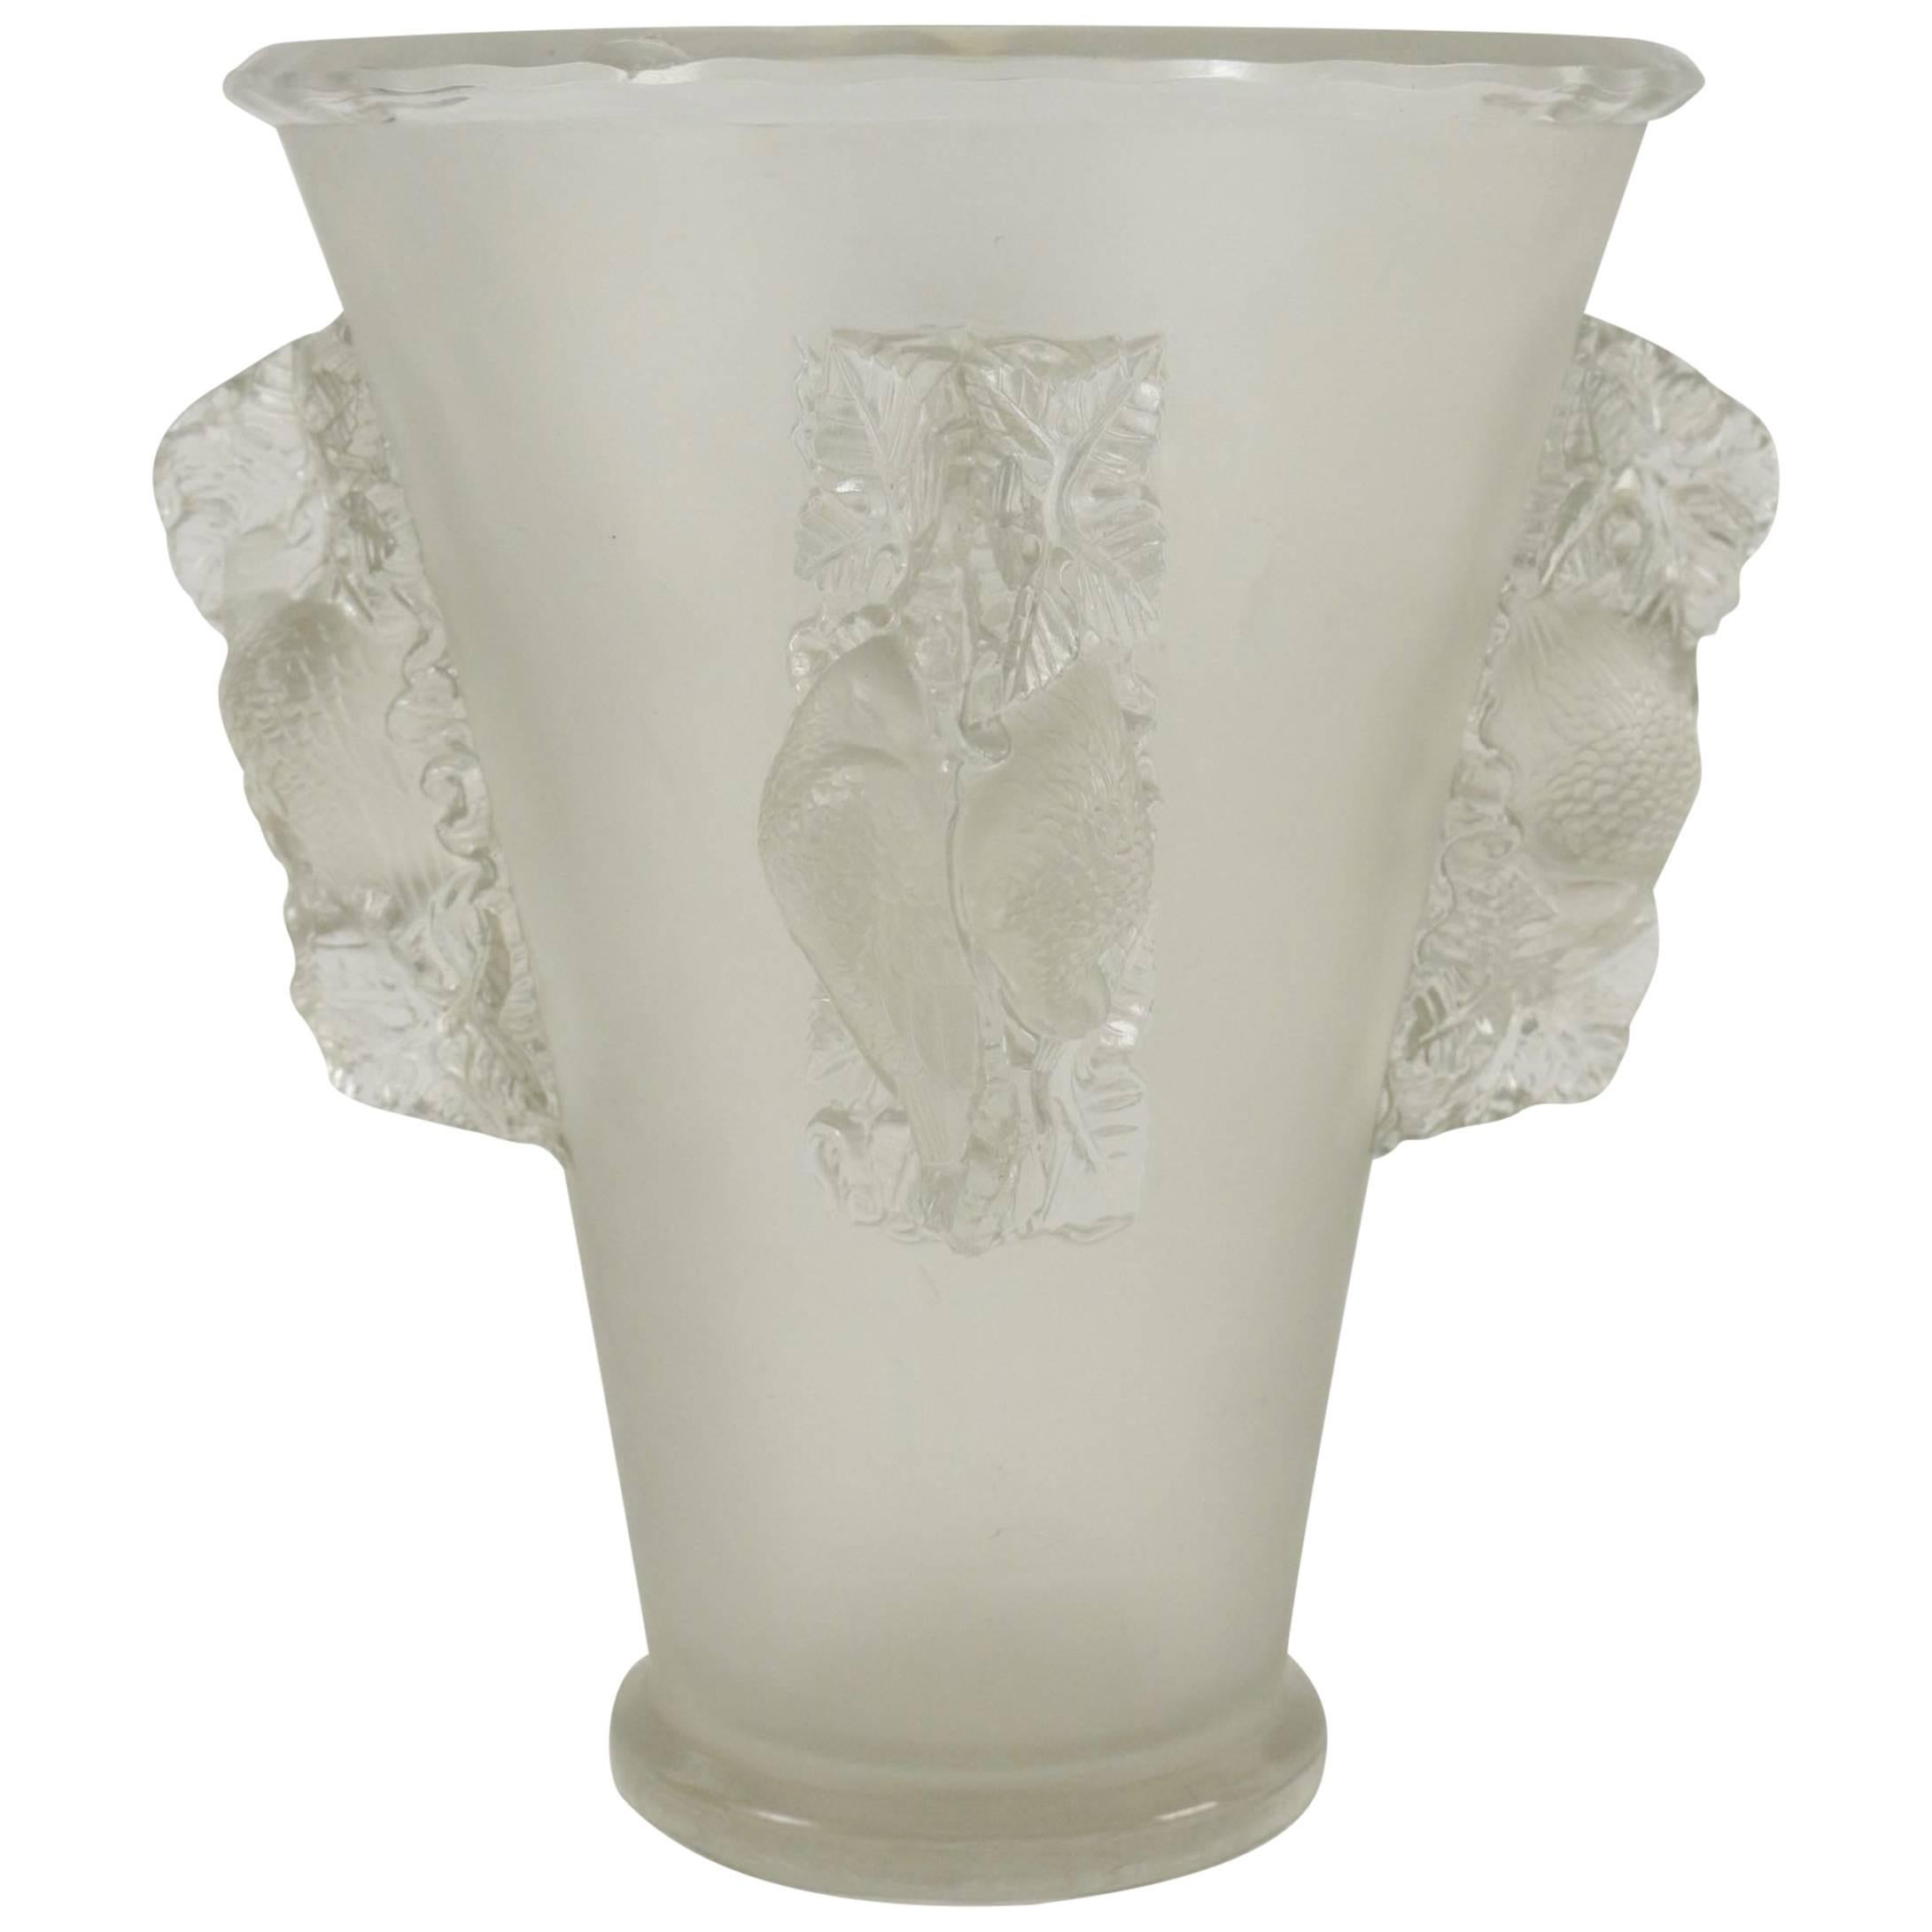 Clear and frosted Lalique vase featuring four panels with high relief birds
large high relief fowl motifs spaced evenly around the outside
 signature Bibliographie: Félix Marcilhac, 